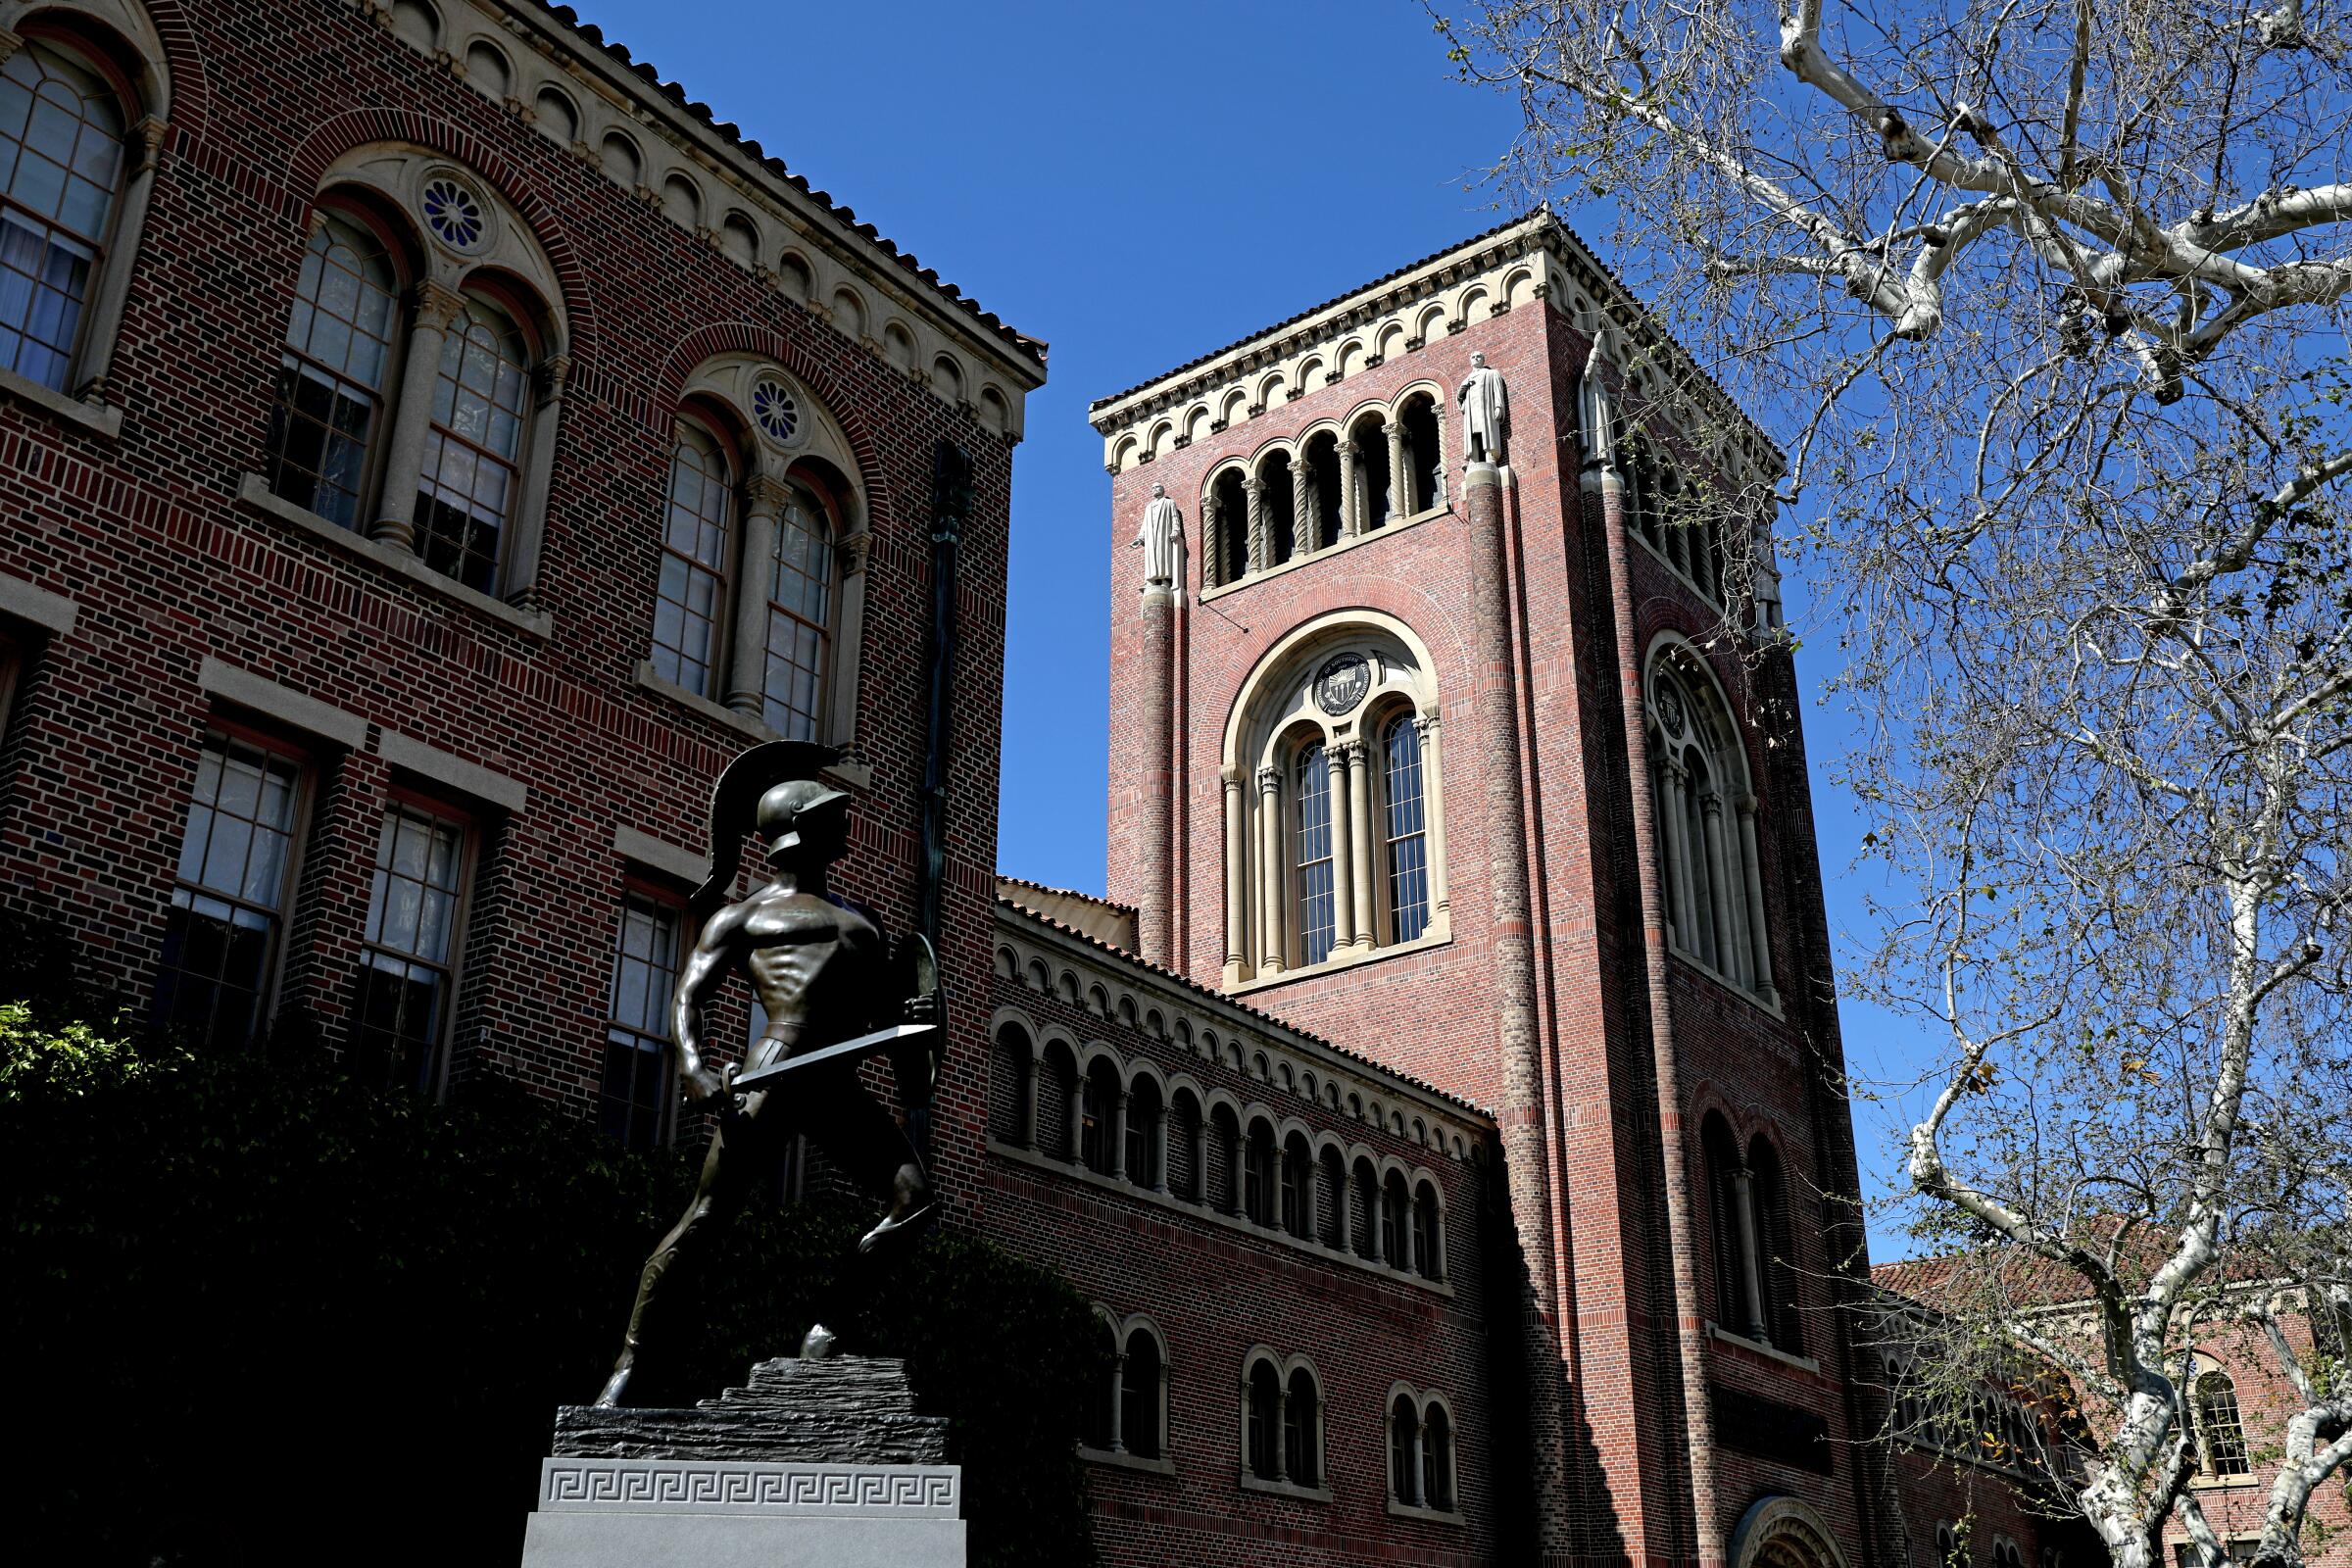 Bovard Administration Building with Tommy Trojan sculpture on the USC campus.